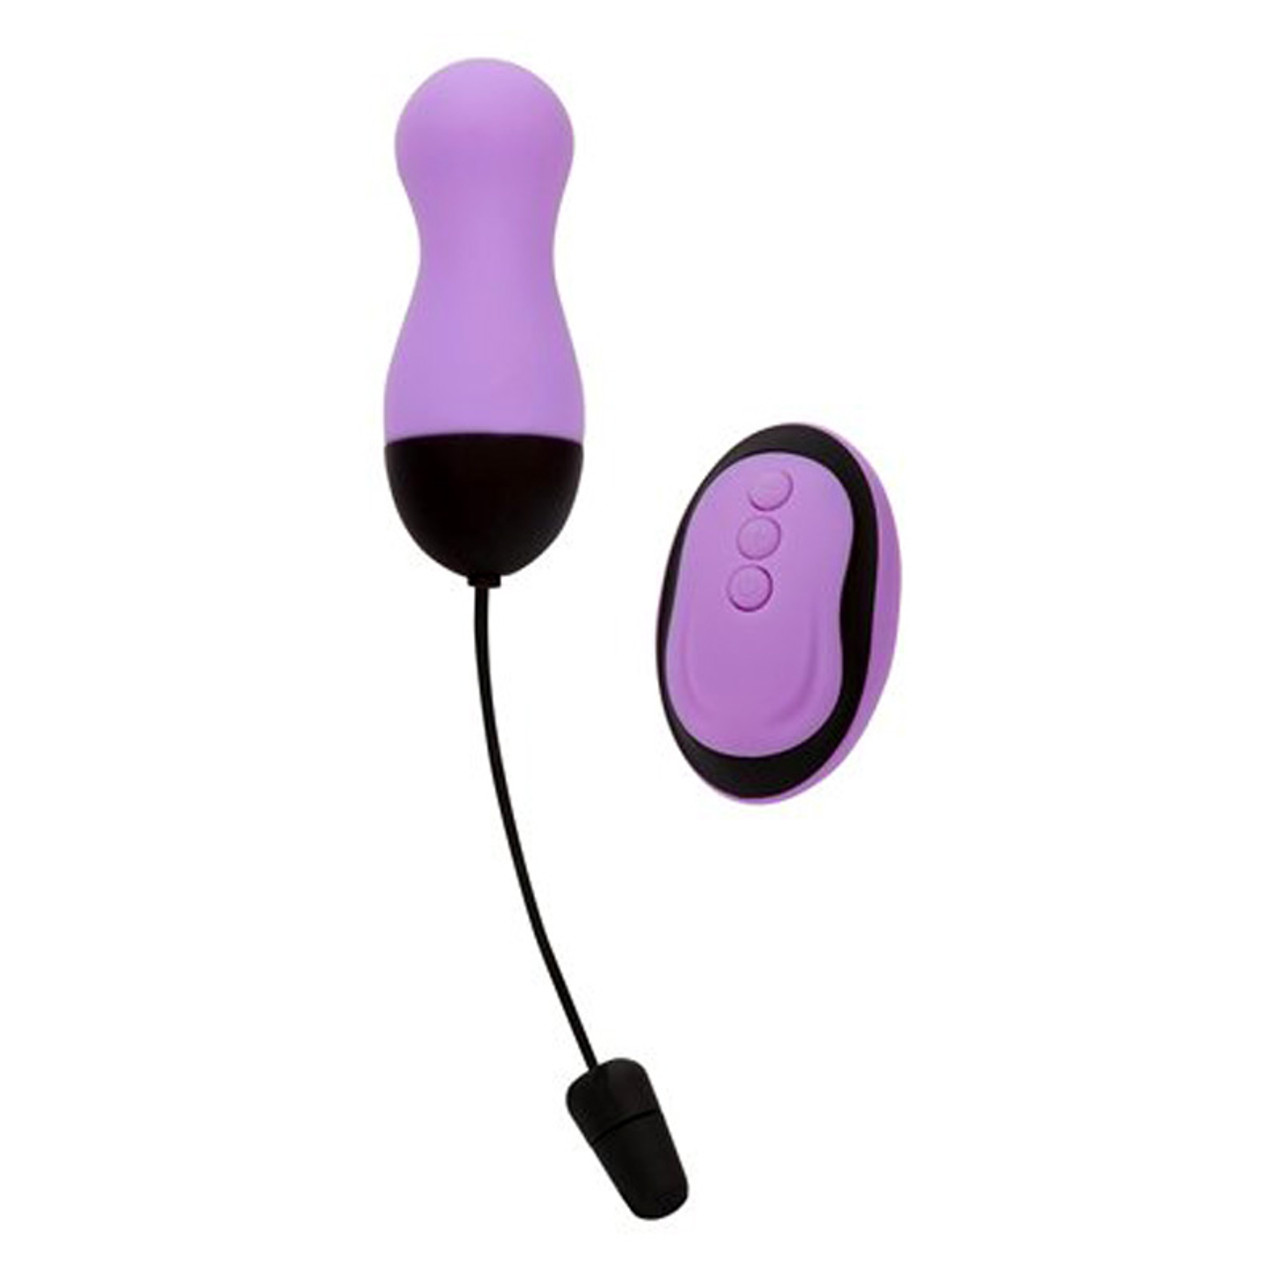 Buy the Simple and True 10-function Remote Control Rechargeable Vibrating Egg Purple